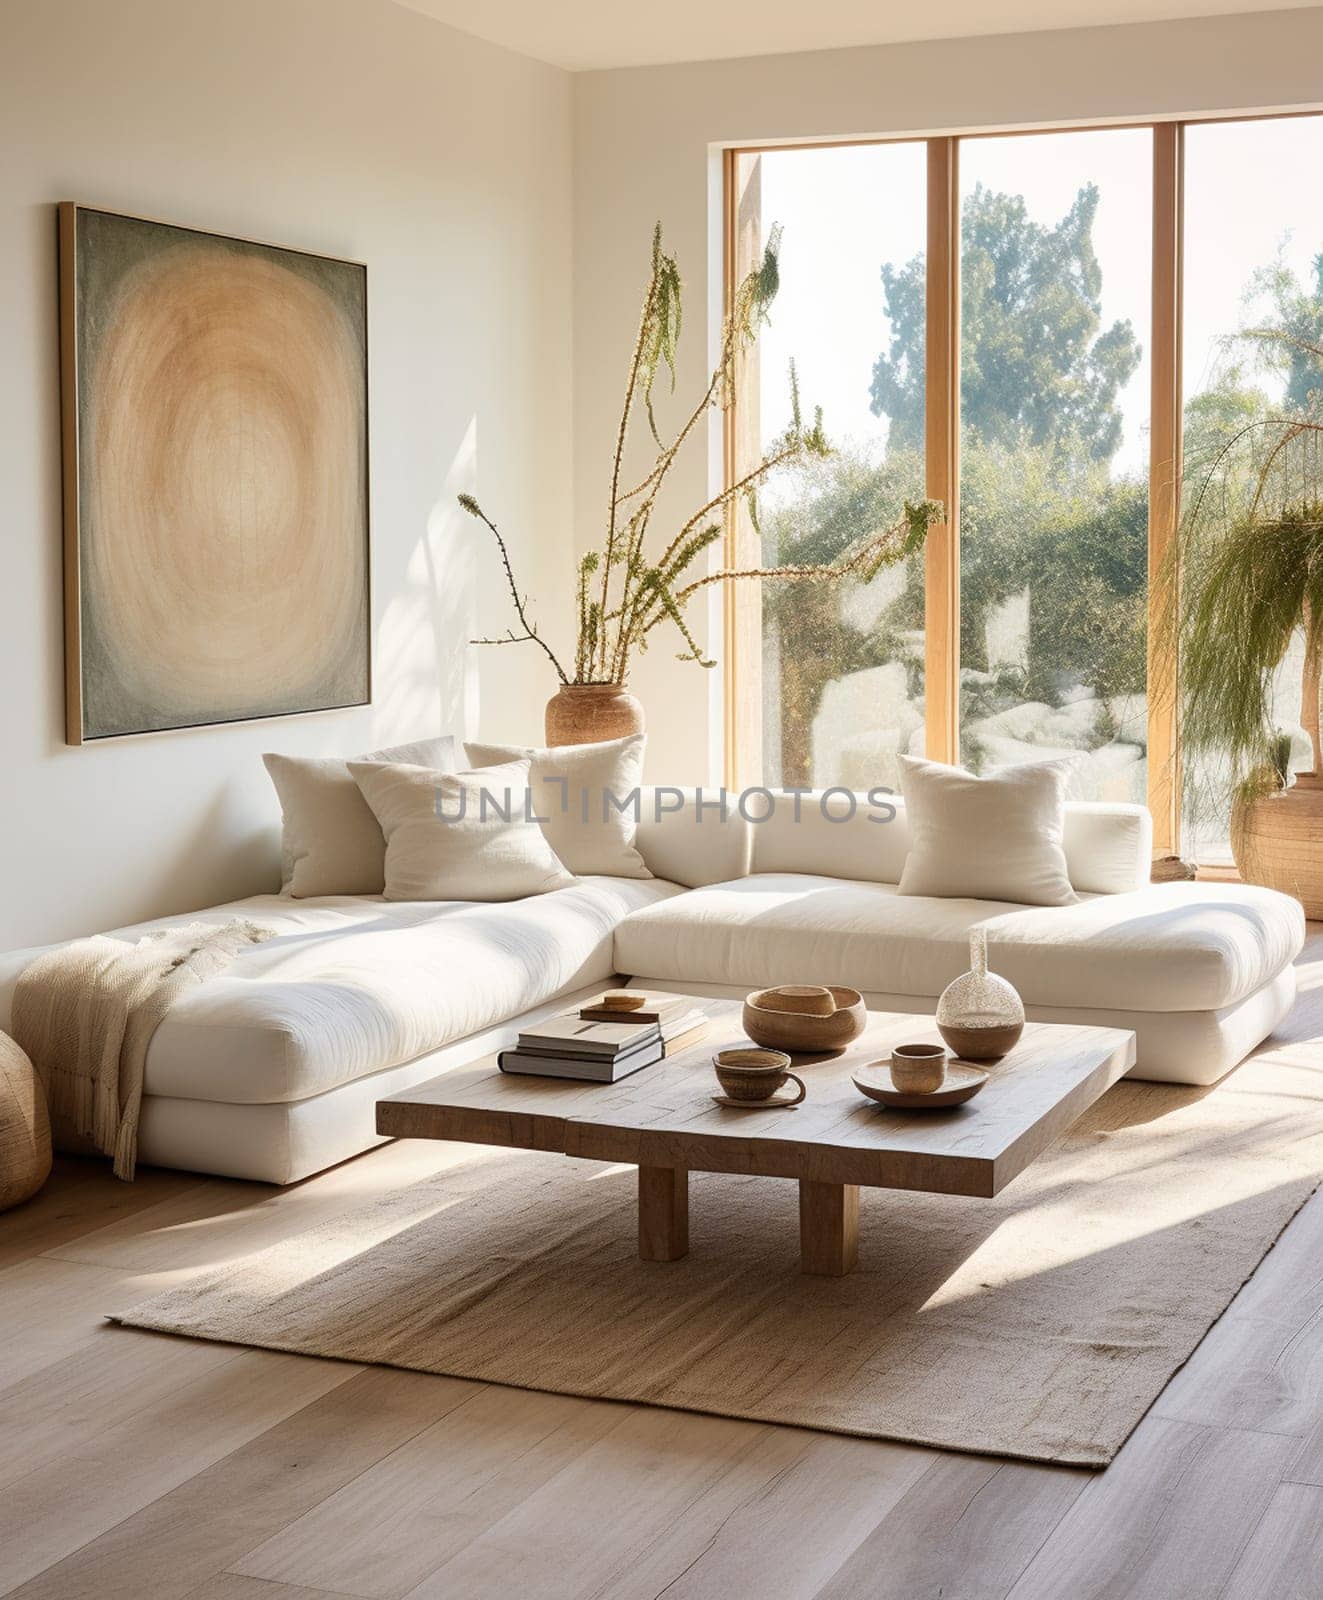 Japanese living room with bleached wooden walls in white and beige tones. Parquet floor, fabric sofa, carpets and decors. Minimal modern interior design, 3d illustration